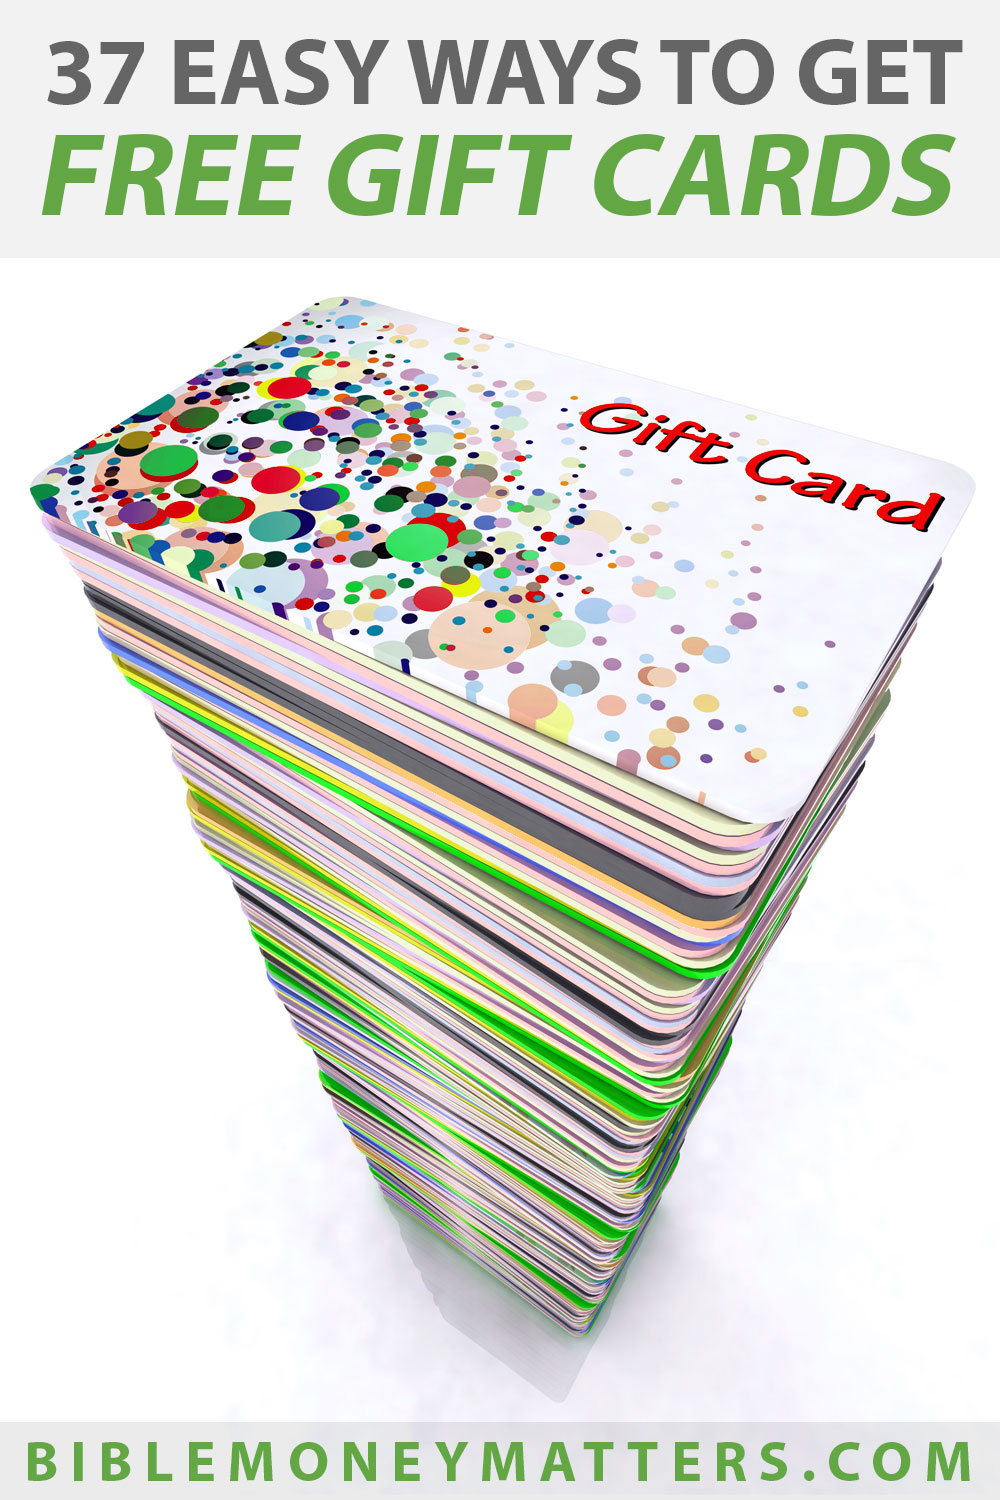 37 Easy Ways To Get Free Gift Cards